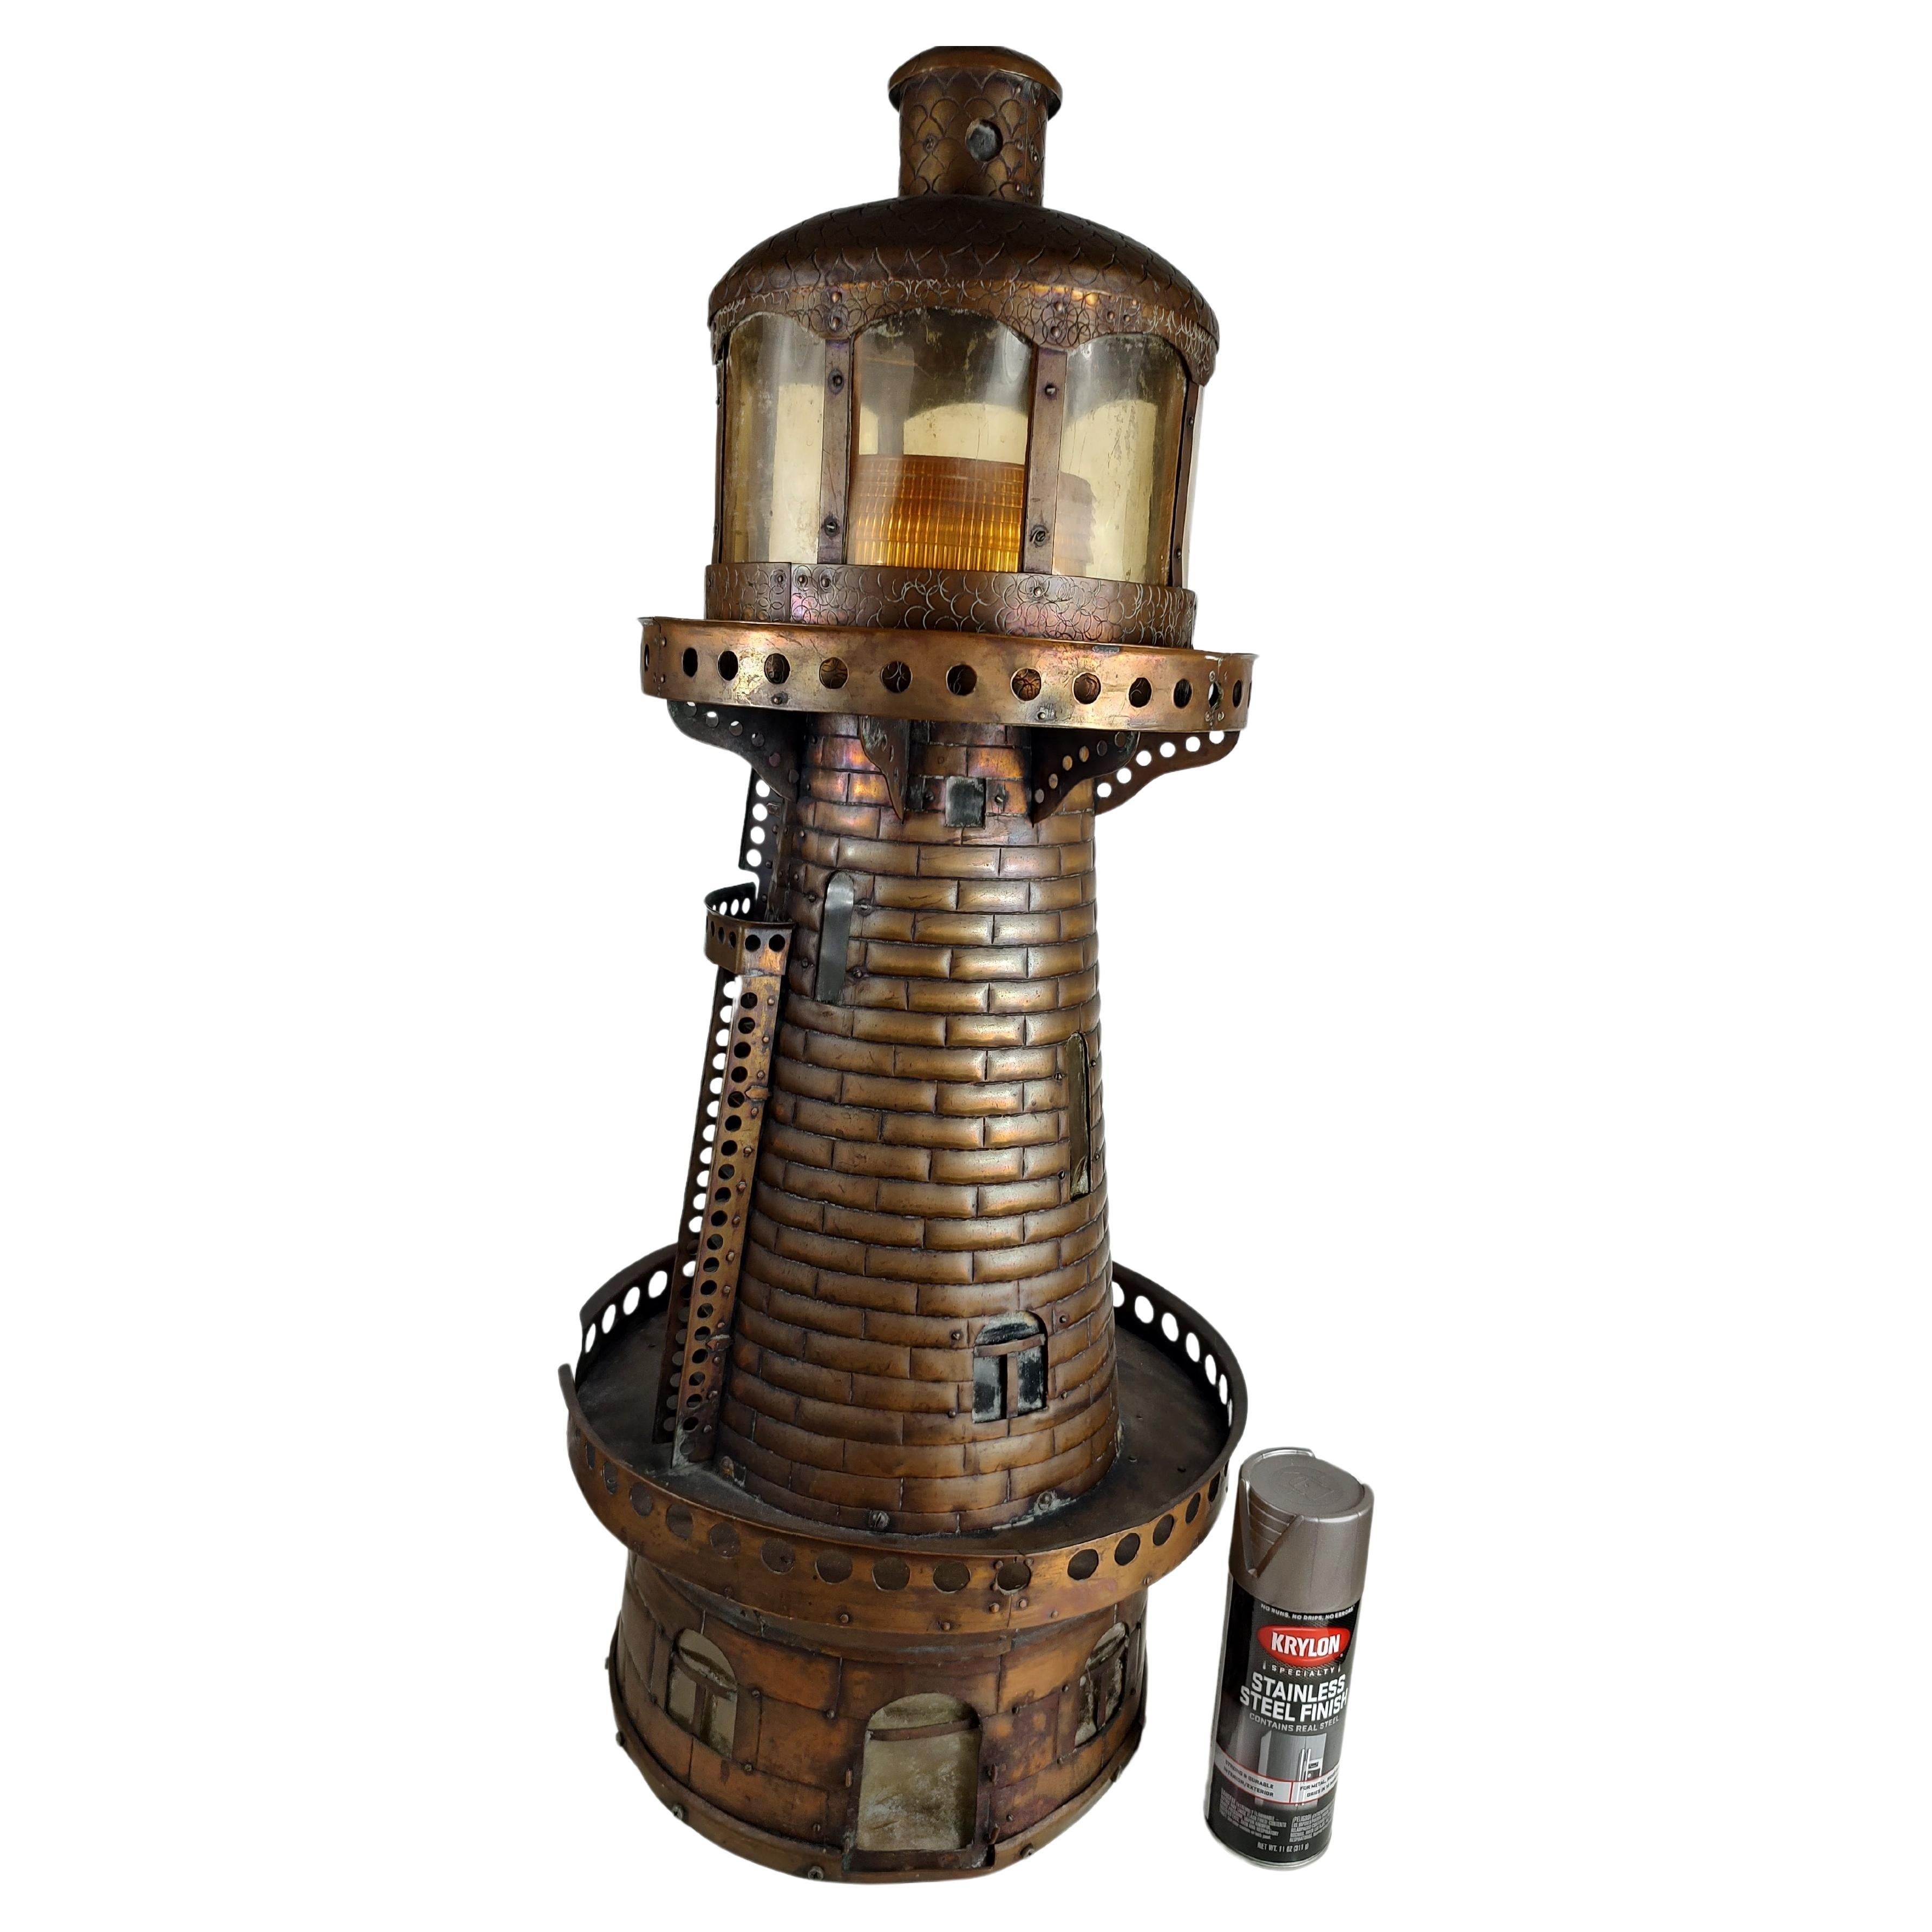 Amazing craftsmanship in this one of a kind piece hand crafted from copper. Hammered repousse in and around the entire lighthouse. Tall 33 inches by 14 diameter with an 11 inch balcony. Entirely lights up, Tower with a large dome light with a yellow